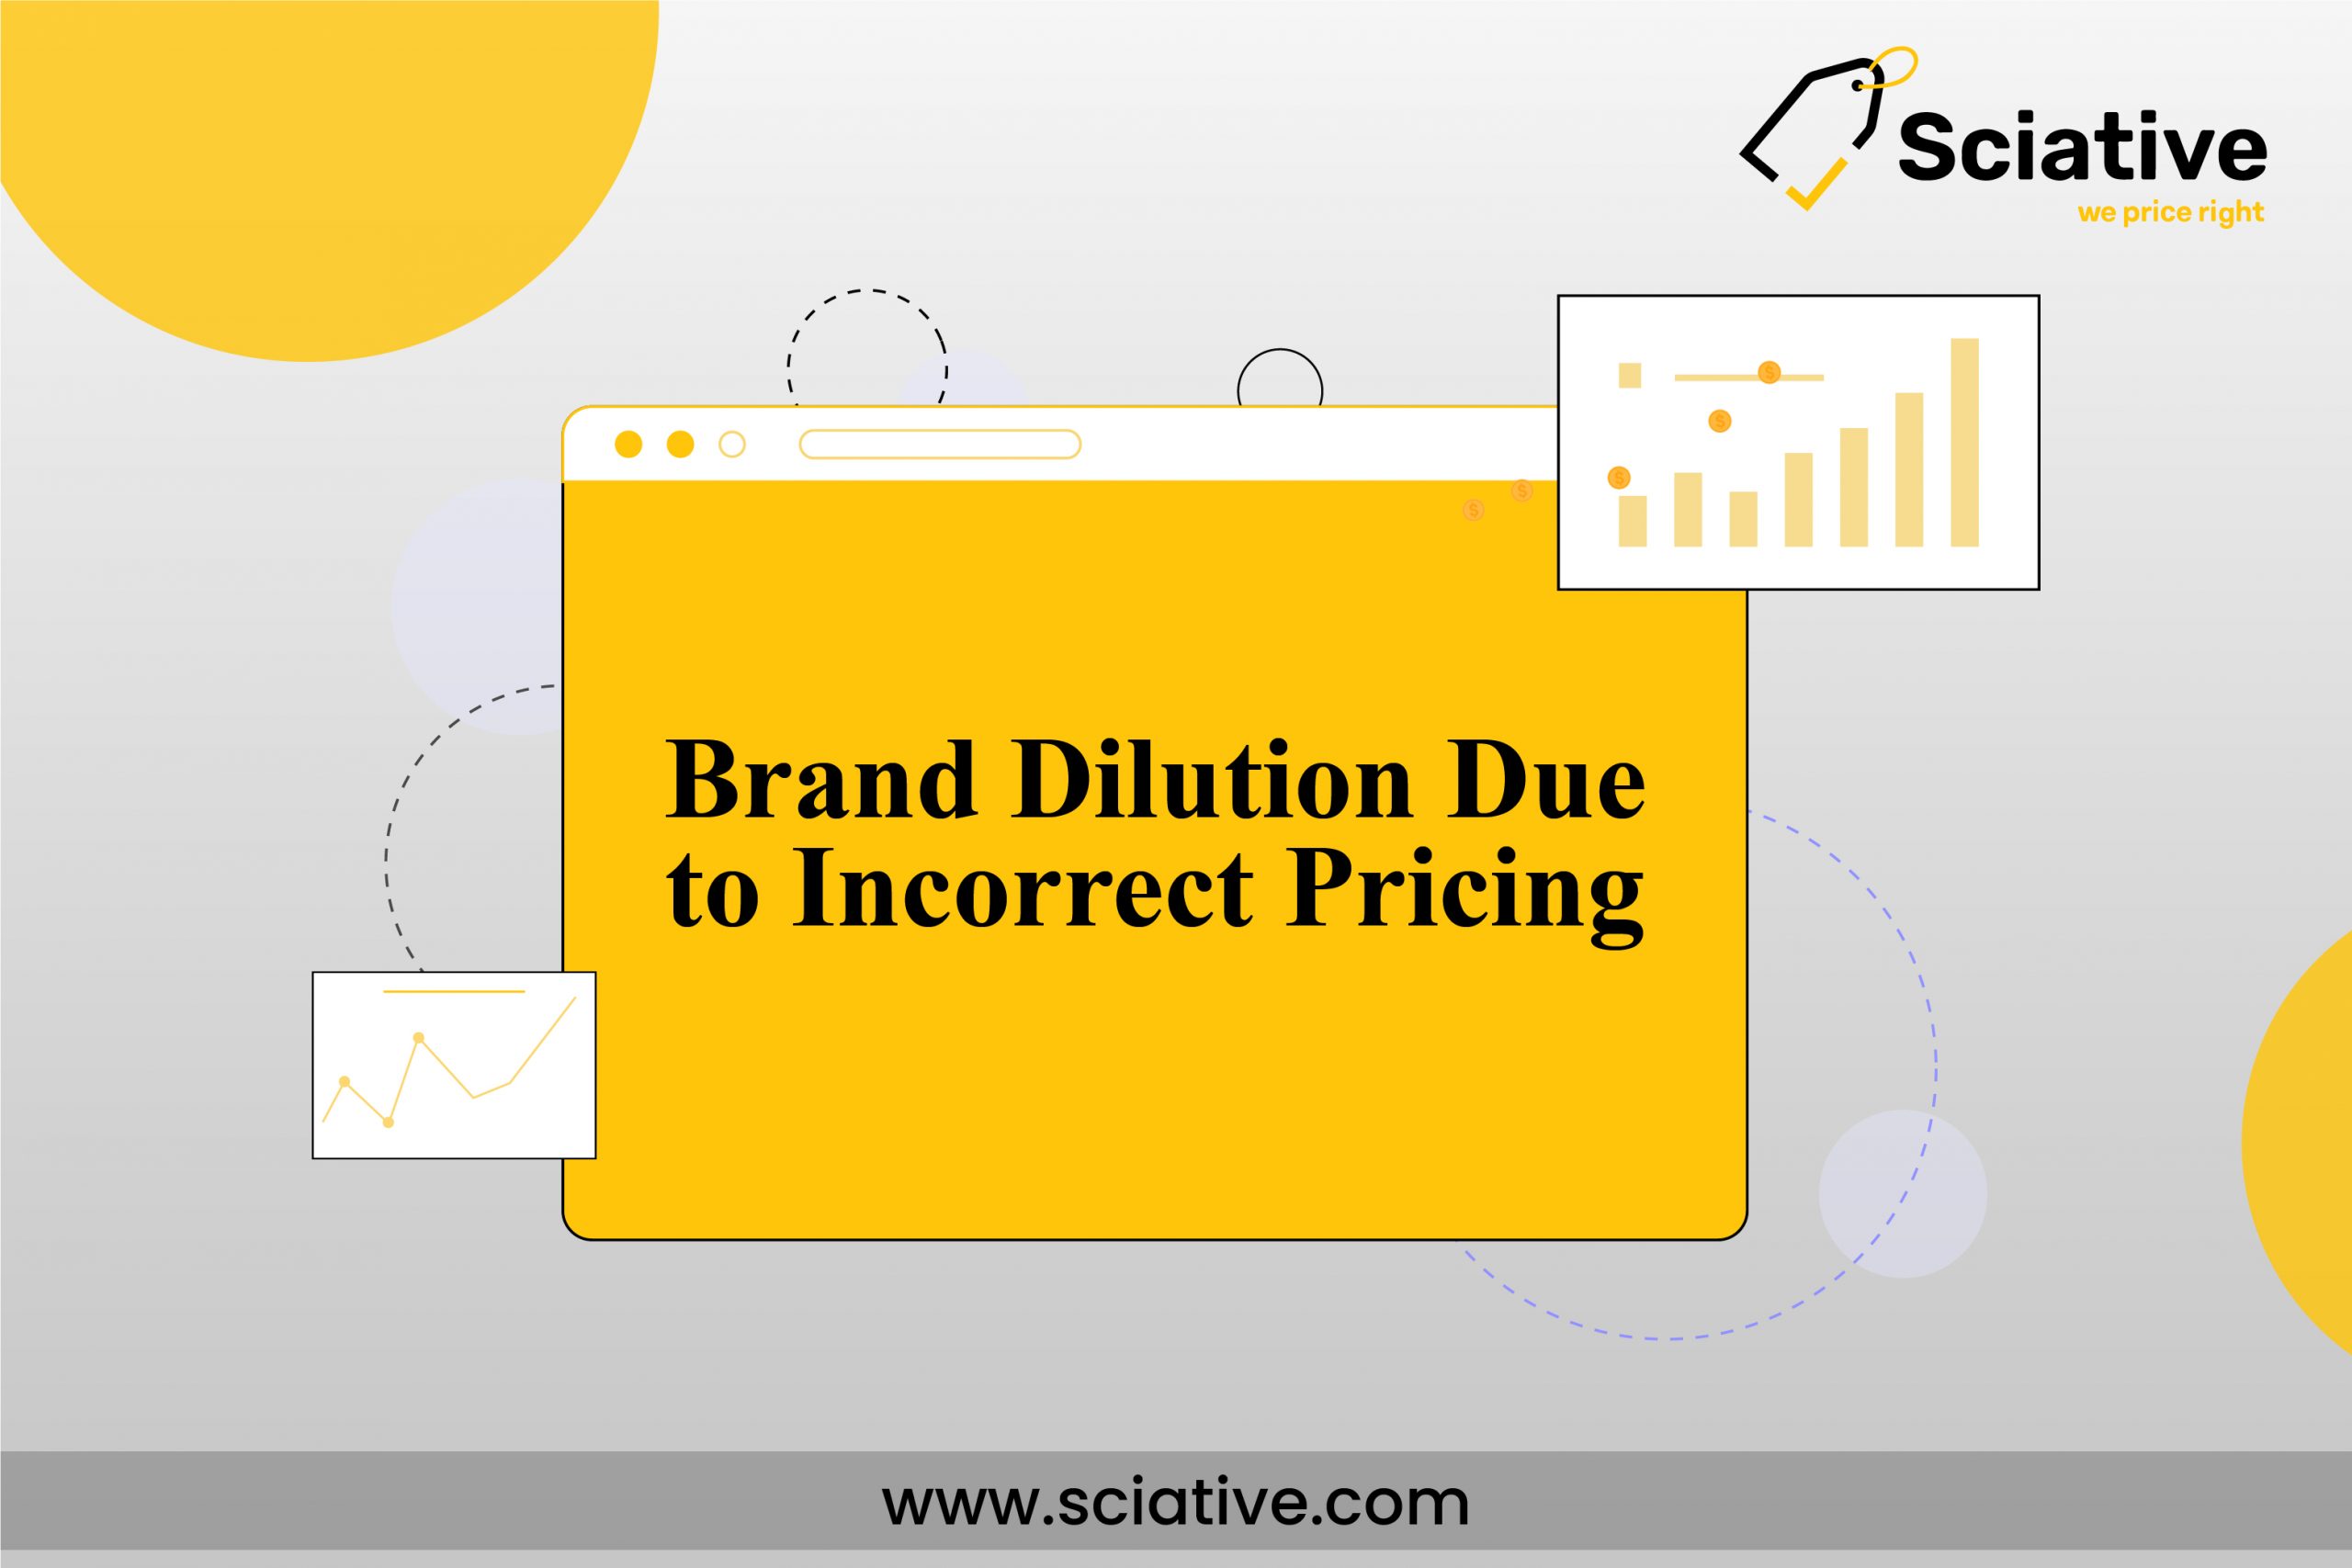 Brand Dilution Due to Incorrect Pricing